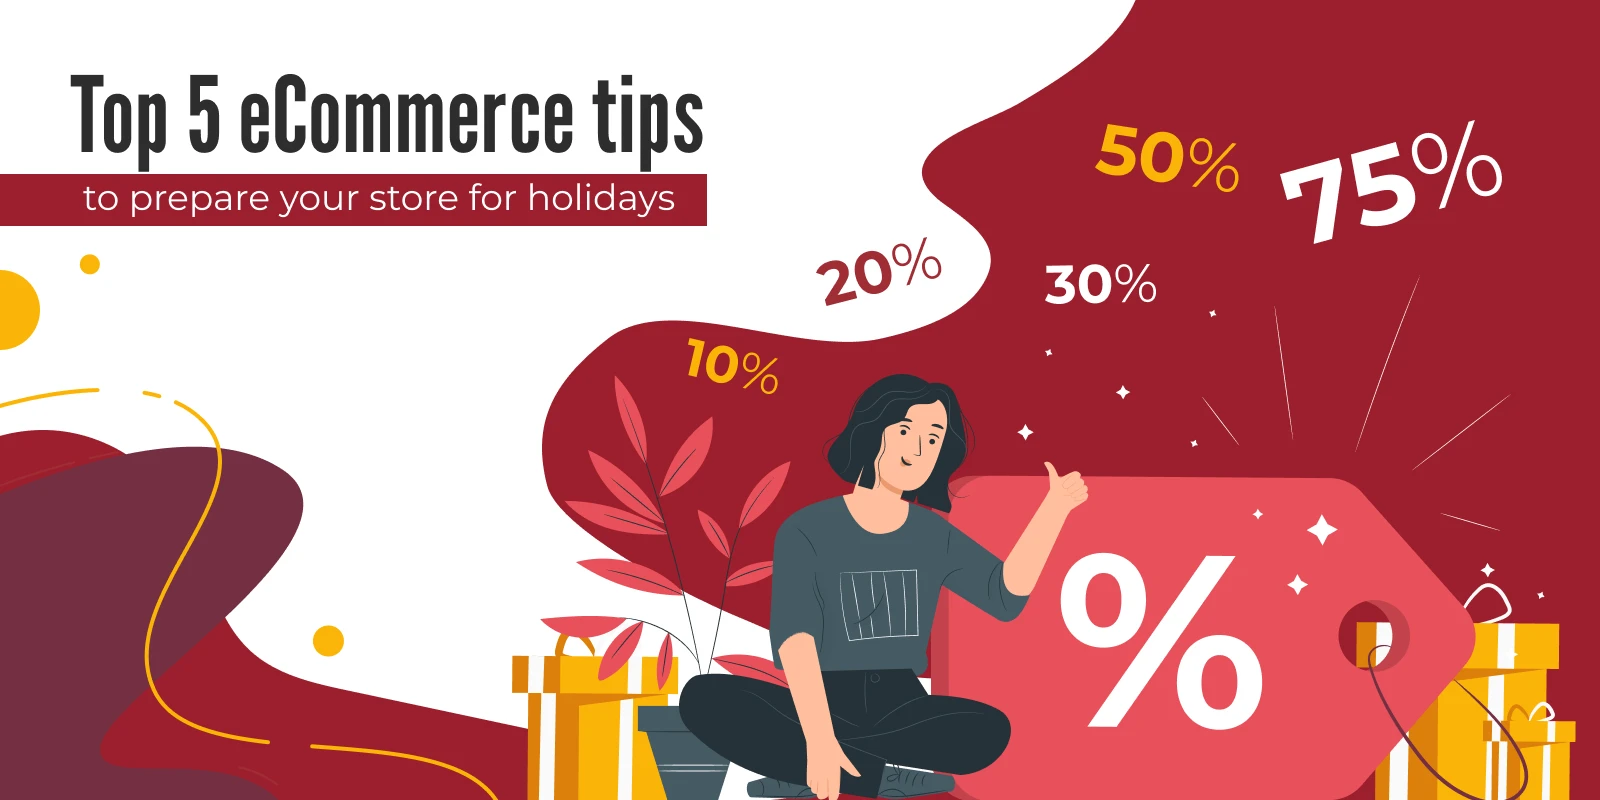 Top 5 eCommerce tips to prepare your store for holidays in 2021